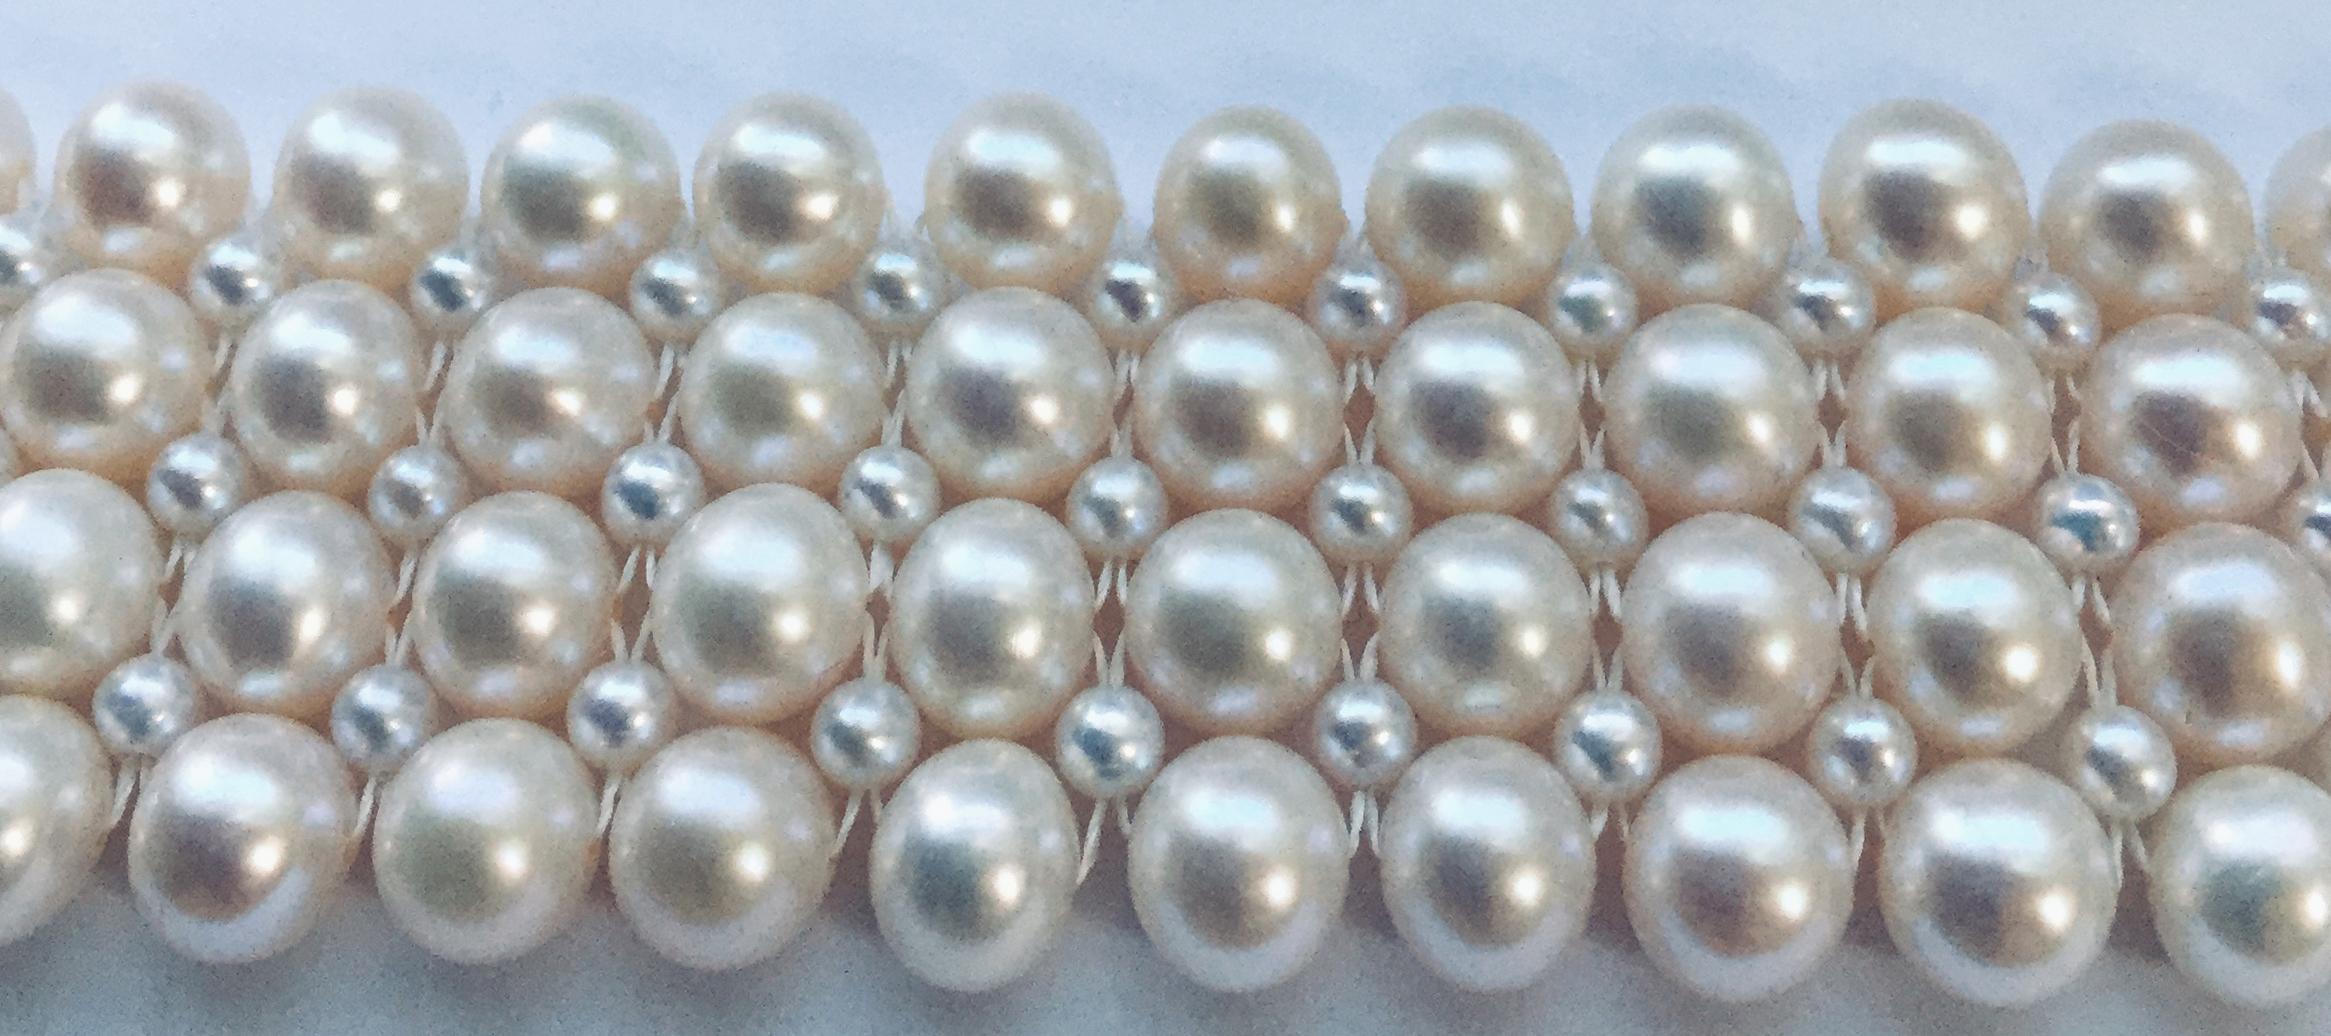 Women's Marina J. Hand-Woven Pearl Bracelet with 14 Karat White Gold Plated Clasp